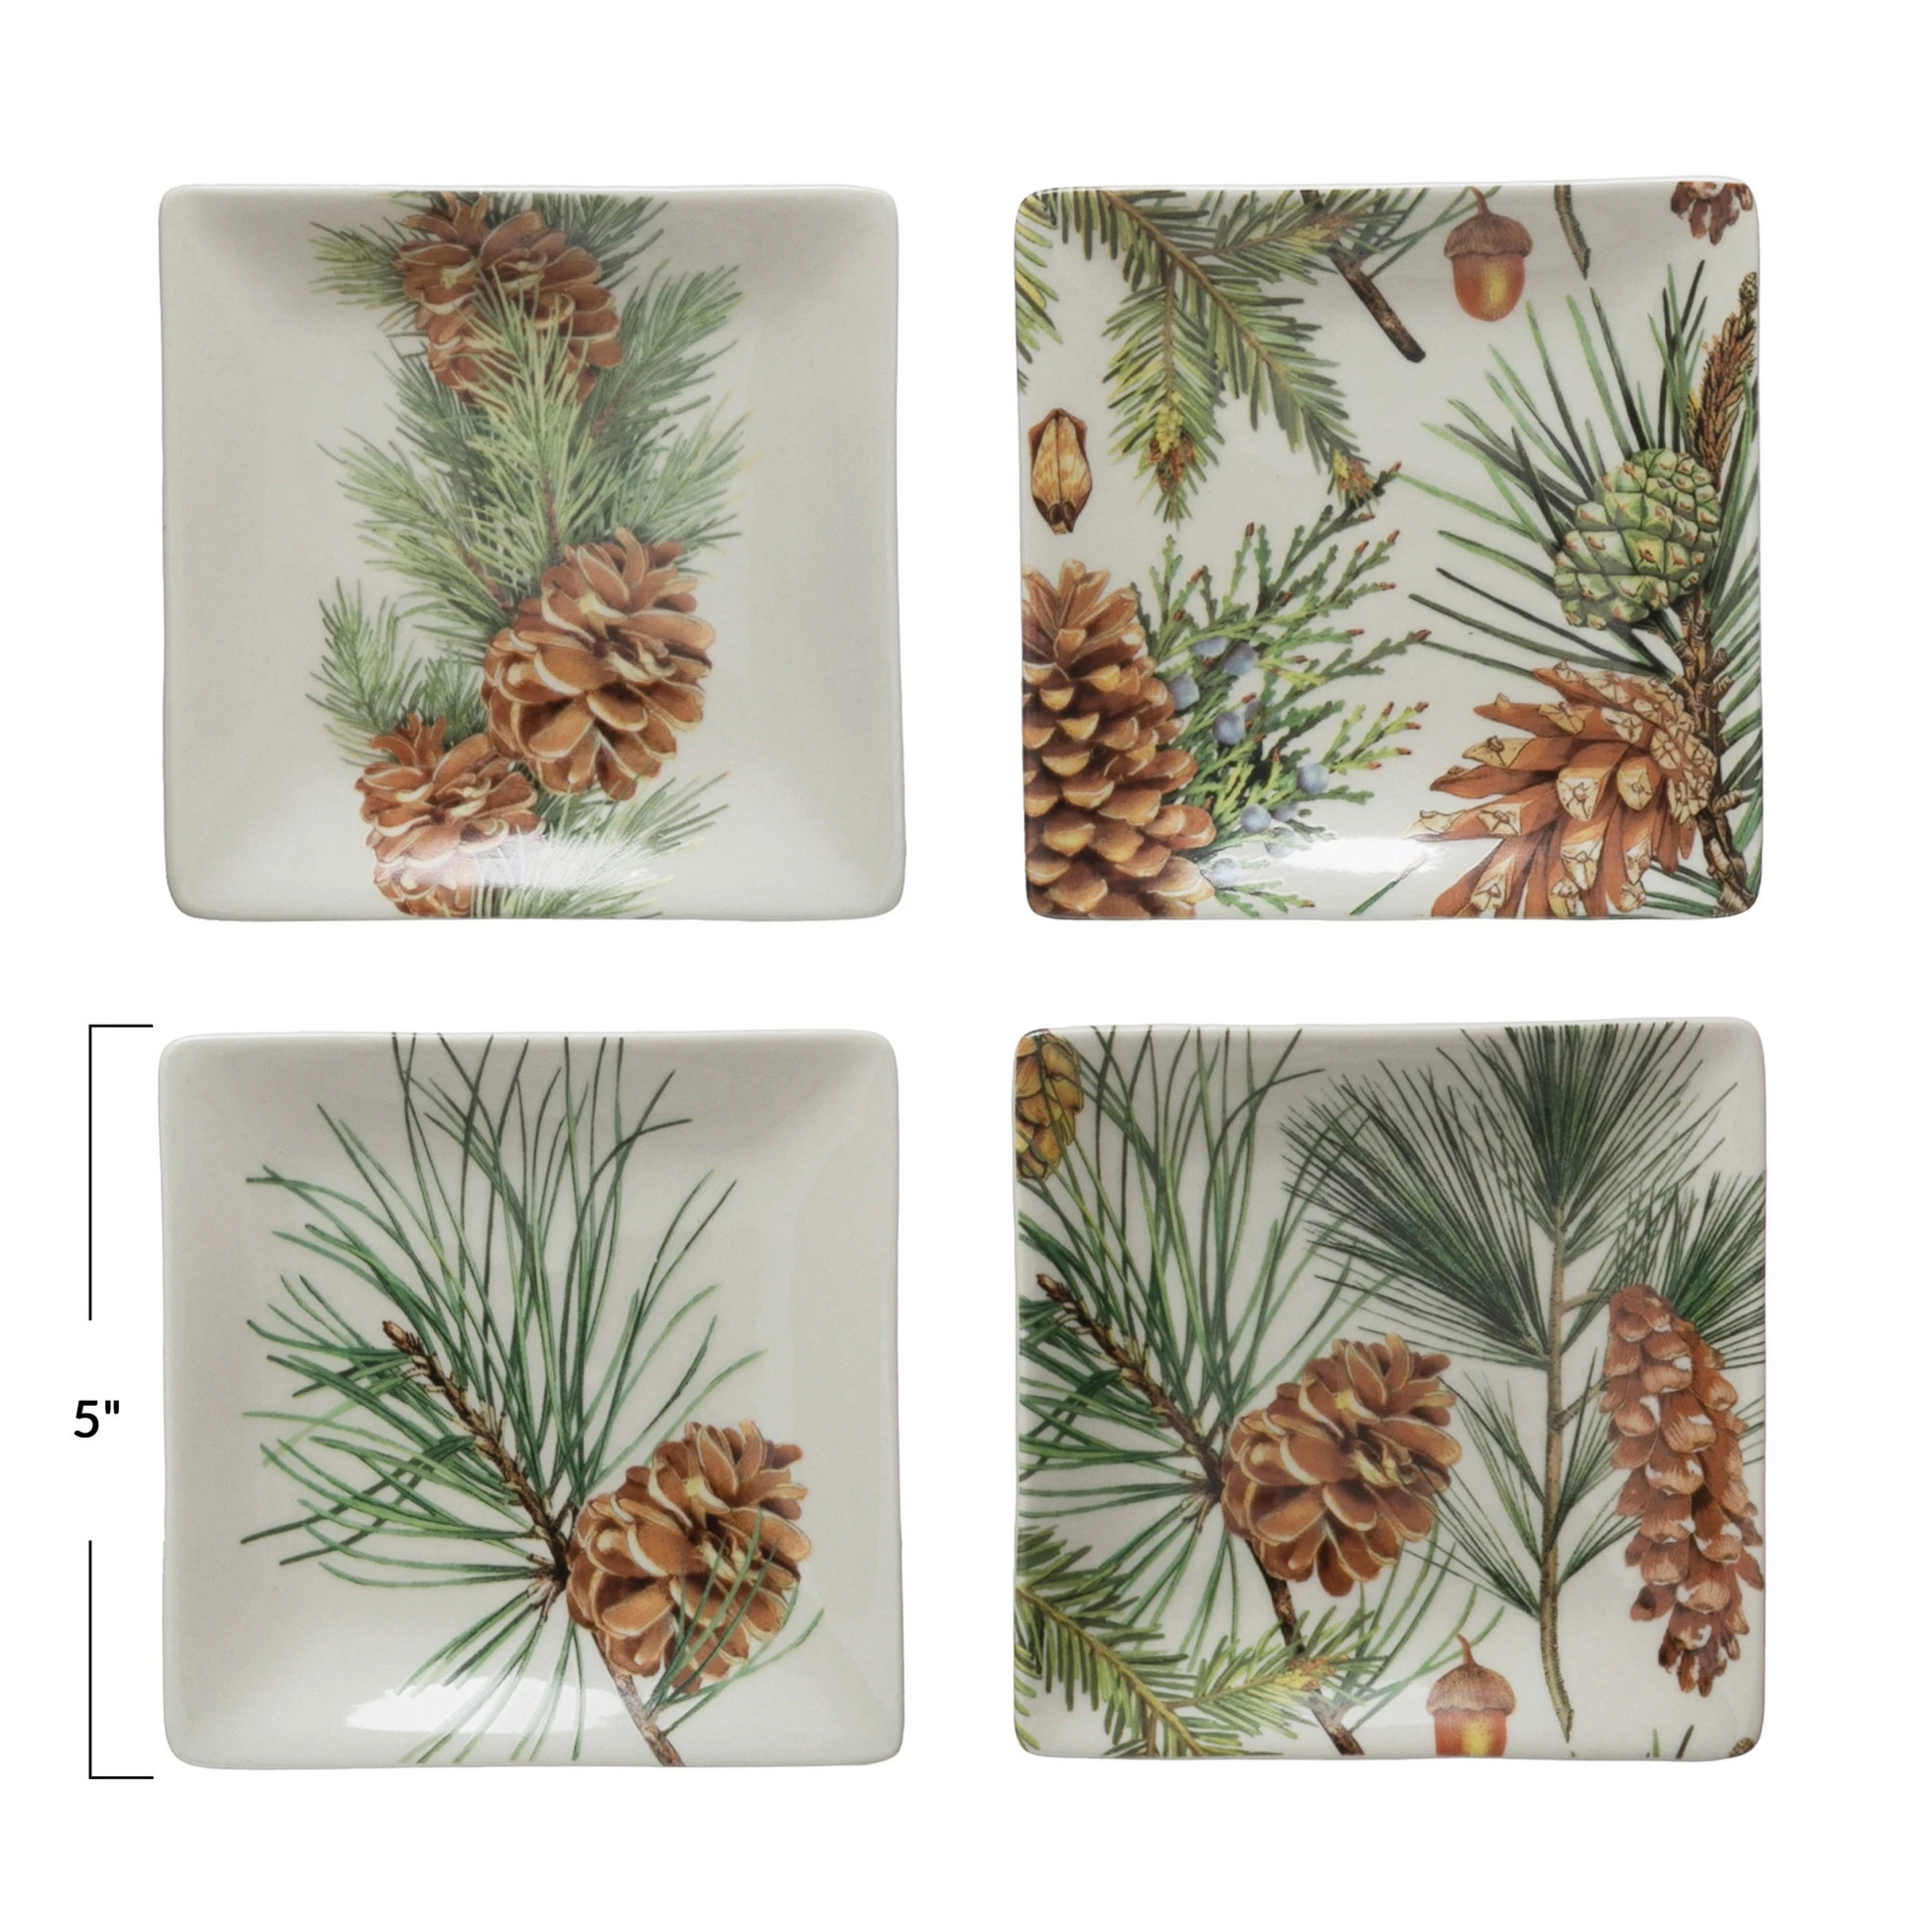 Square Stoneware Plate With Pinecones & Pine Needles - 5-in - Mellow Monkey